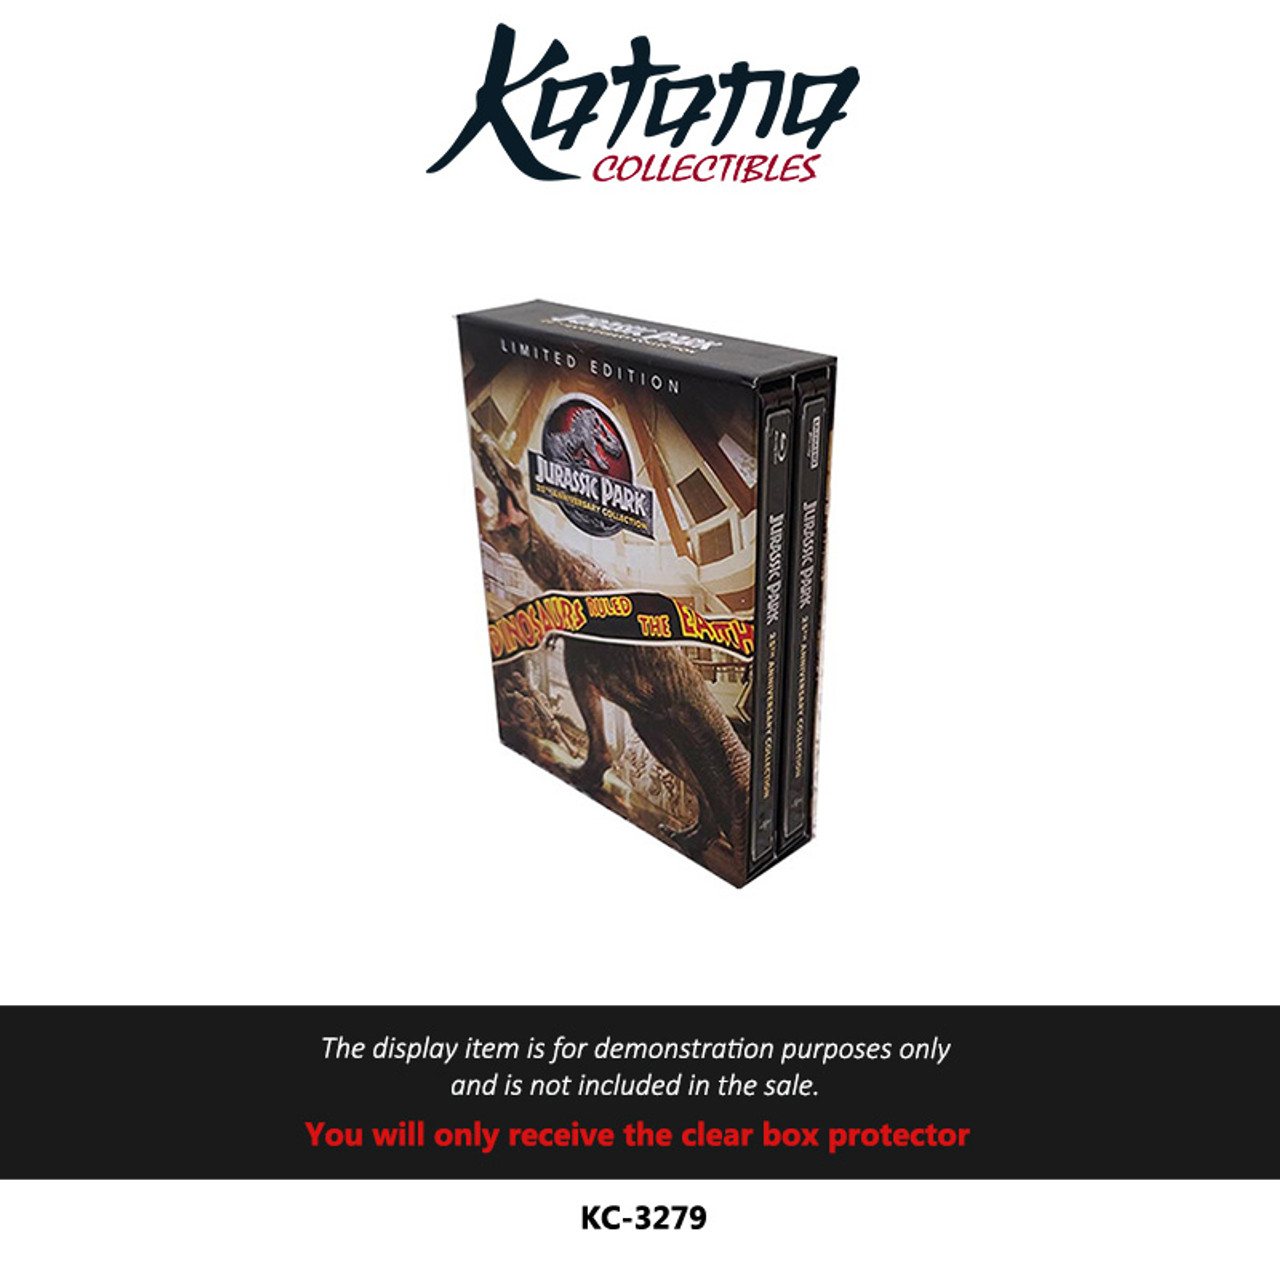 Katana Collectibles Protector For Jurassic Park 25th Anniversary Collection